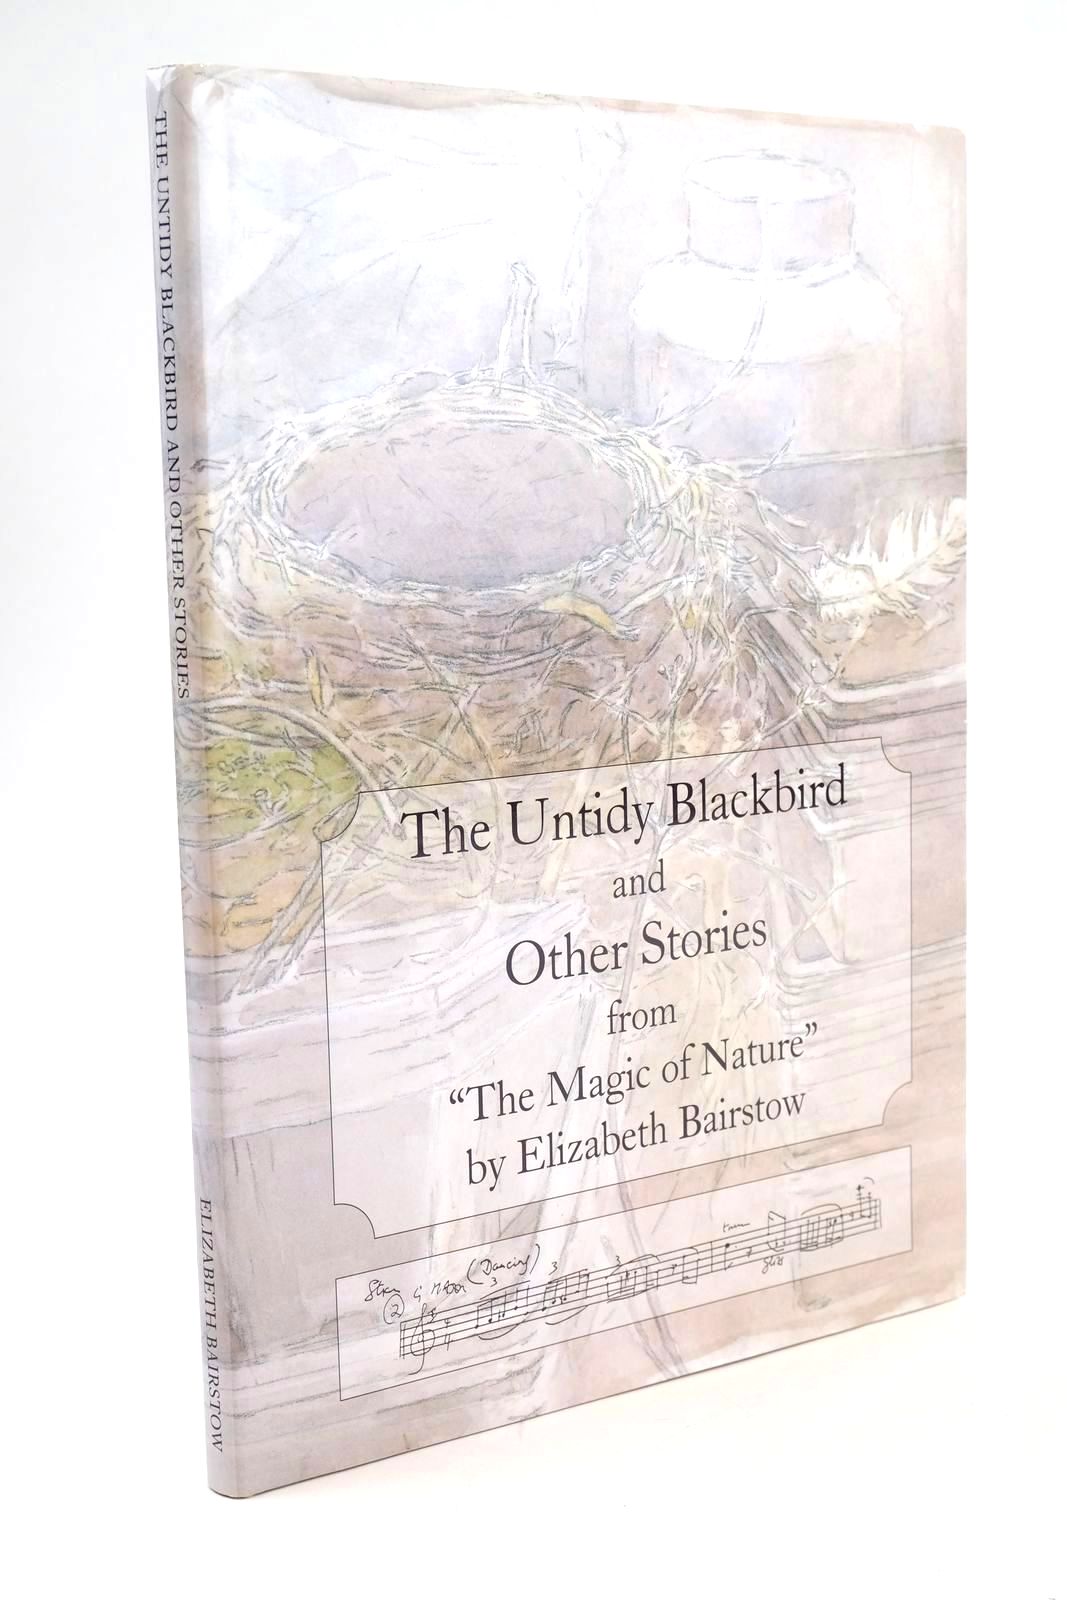 Photo of THE UNTIDY BLACKBIRD AND OTHER STORIES FROM &quot;THE MAGIC OF NATURE&quot; ABOUT A FARM written by Bairstow, Elizabeth illustrated by Bairstow, Elizabeth published by The Bairstow Gallery (STOCK CODE: 1325055)  for sale by Stella & Rose's Books